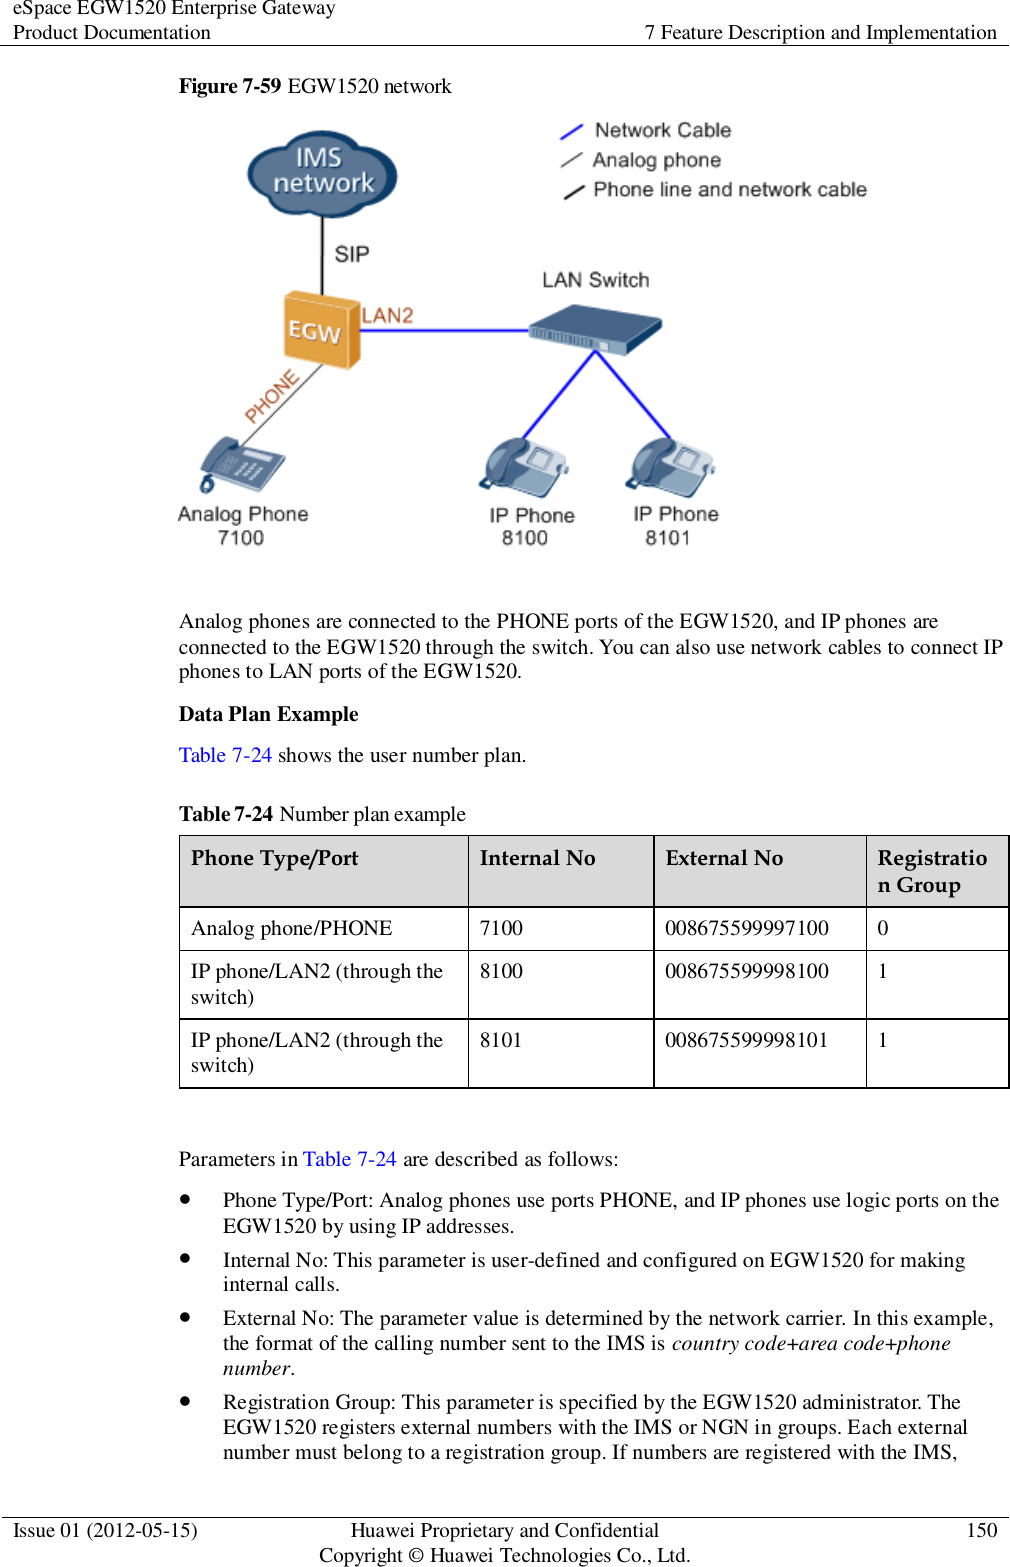 eSpace EGW1520 Enterprise Gateway Product Documentation 7 Feature Description and Implementation  Issue 01 (2012-05-15) Huawei Proprietary and Confidential                                     Copyright © Huawei Technologies Co., Ltd. 150  Figure 7-59 EGW1520 network   Analog phones are connected to the PHONE ports of the EGW1520, and IP phones are connected to the EGW1520 through the switch. You can also use network cables to connect IP phones to LAN ports of the EGW1520. Data Plan Example Table 7-24 shows the user number plan. Table 7-24 Number plan example Phone Type/Port Internal No External No Registration Group Analog phone/PHONE 7100 008675599997100 0 IP phone/LAN2 (through the switch) 8100 008675599998100 1 IP phone/LAN2 (through the switch) 8101 008675599998101 1  Parameters in Table 7-24 are described as follows:  Phone Type/Port: Analog phones use ports PHONE, and IP phones use logic ports on the EGW1520 by using IP addresses.  Internal No: This parameter is user-defined and configured on EGW1520 for making internal calls.  External No: The parameter value is determined by the network carrier. In this example, the format of the calling number sent to the IMS is country code+area code+phone number.  Registration Group: This parameter is specified by the EGW1520 administrator. The EGW1520 registers external numbers with the IMS or NGN in groups. Each external number must belong to a registration group. If numbers are registered with the IMS, 